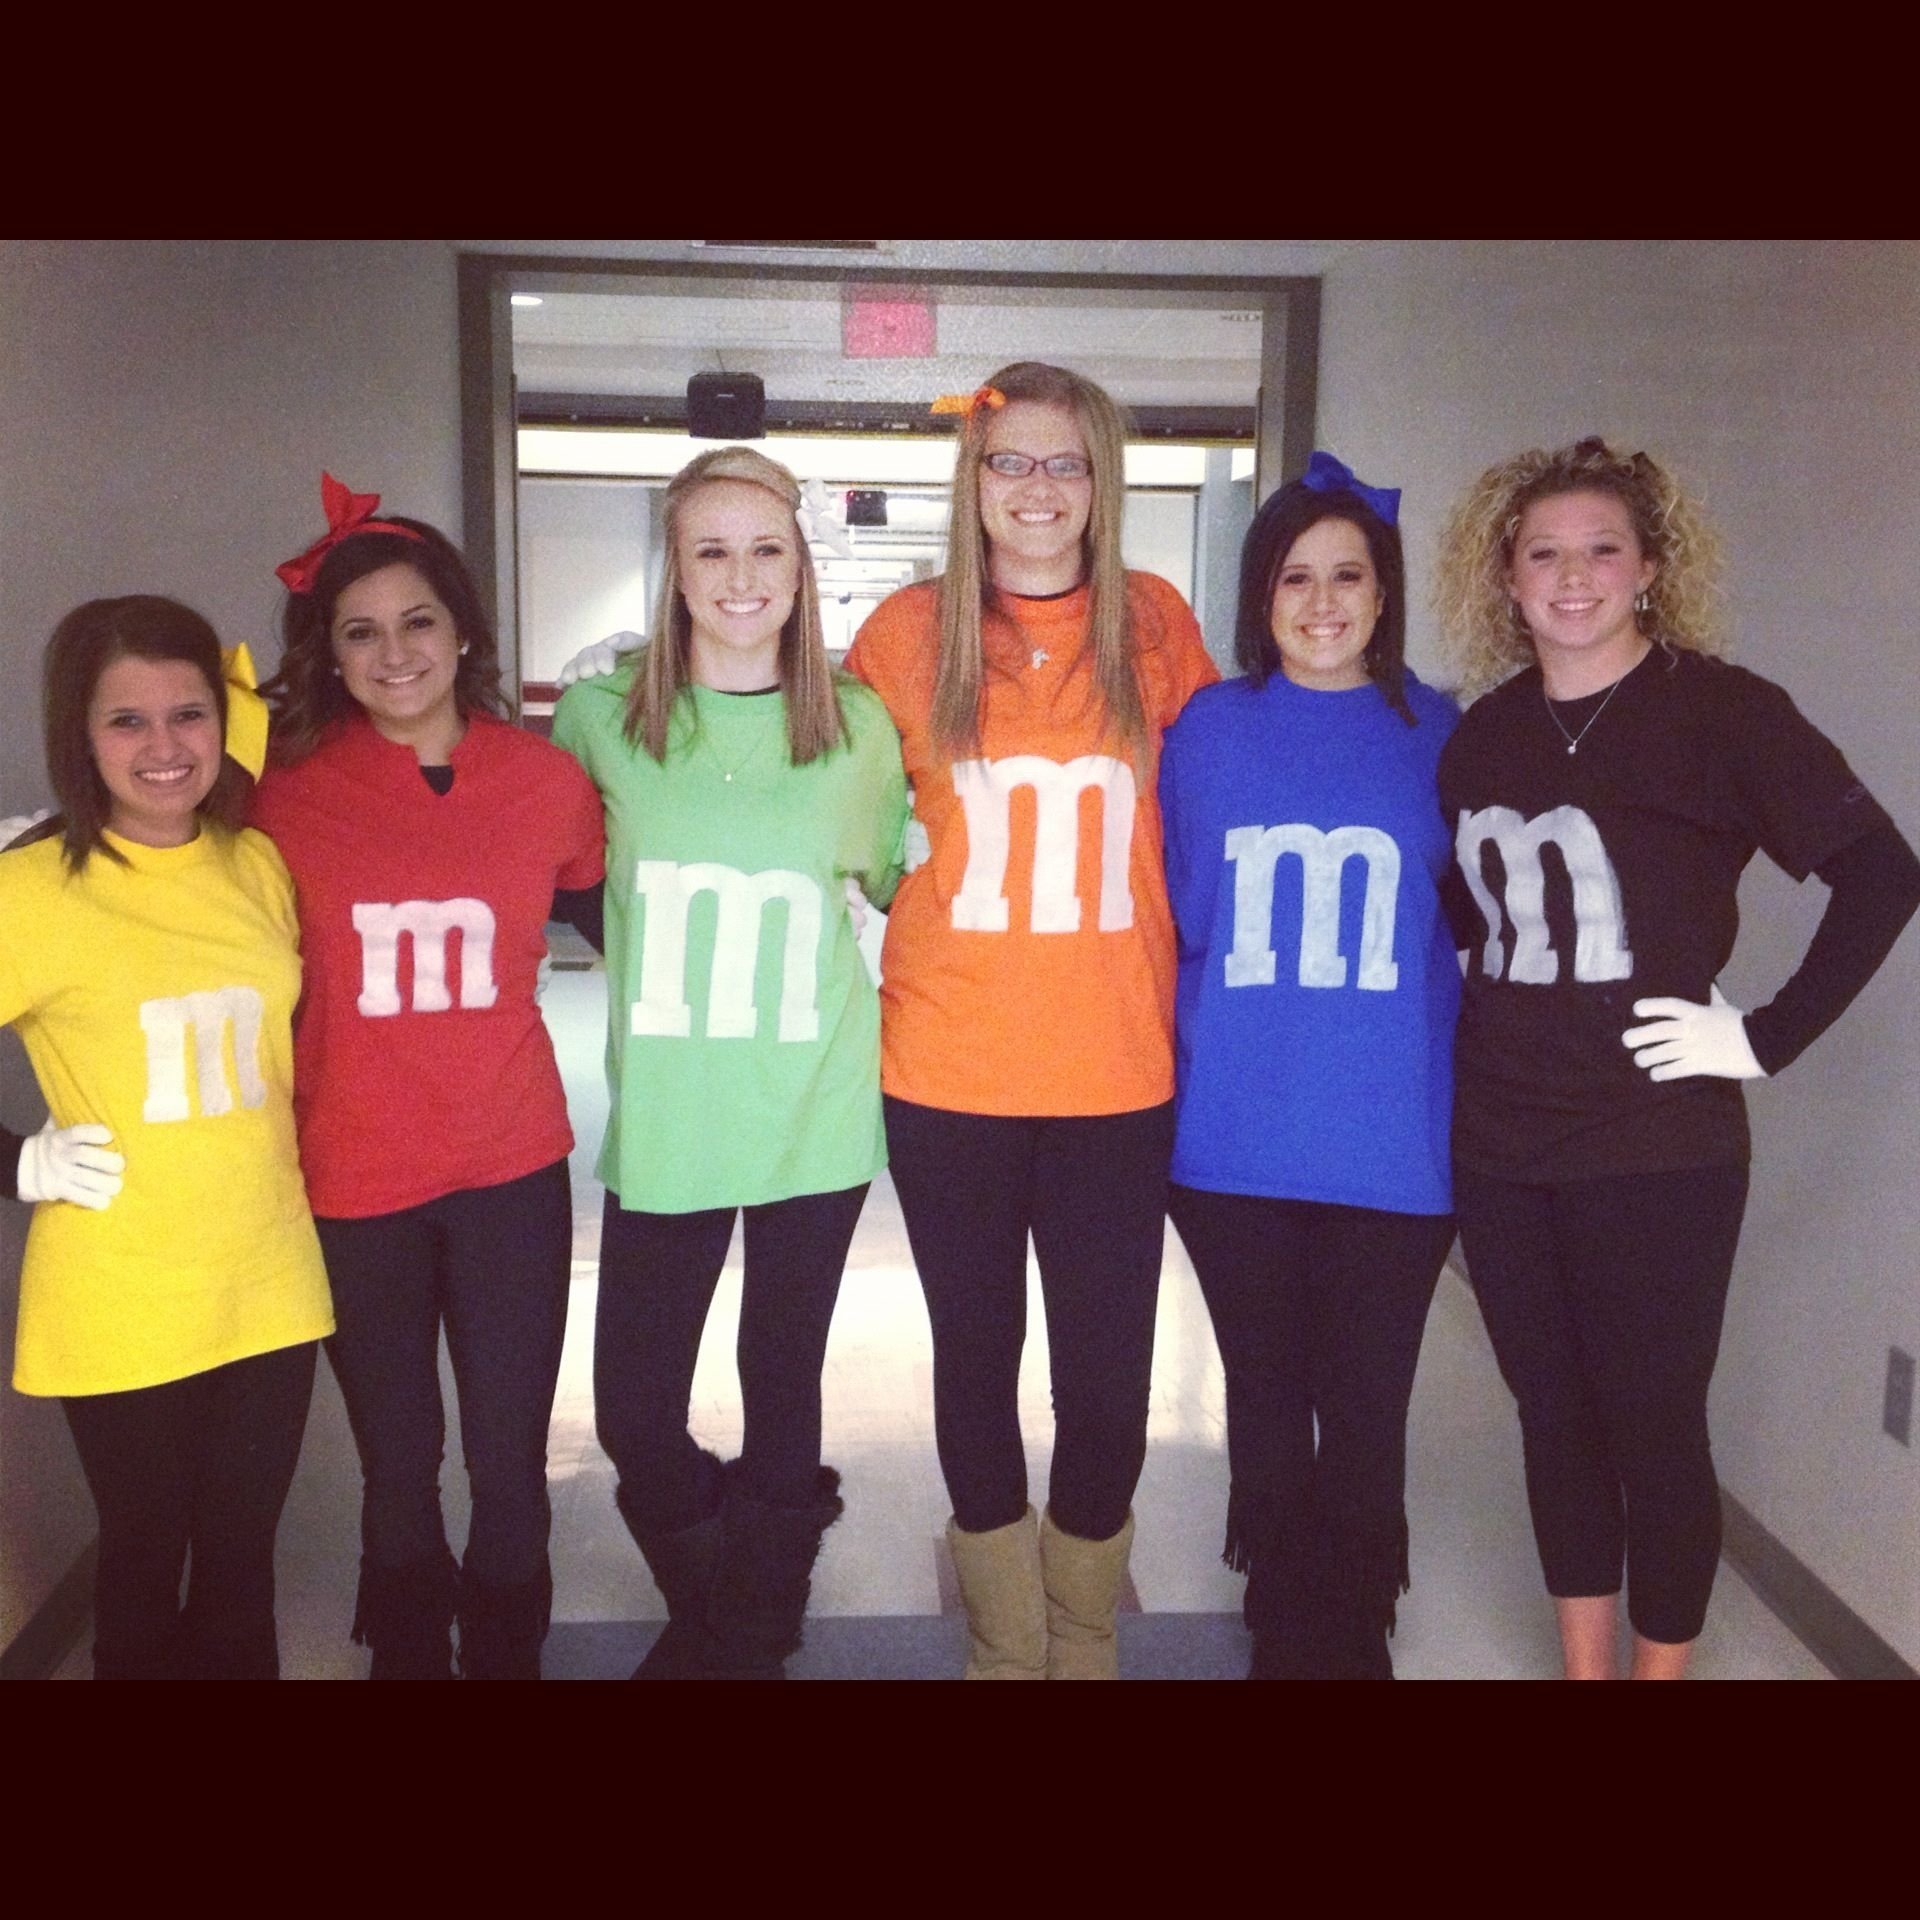 10 Stylish Cute Group Halloween Costume Ideas 21 basic btch halloween costumes that everyone is tired of seeing 2 2022